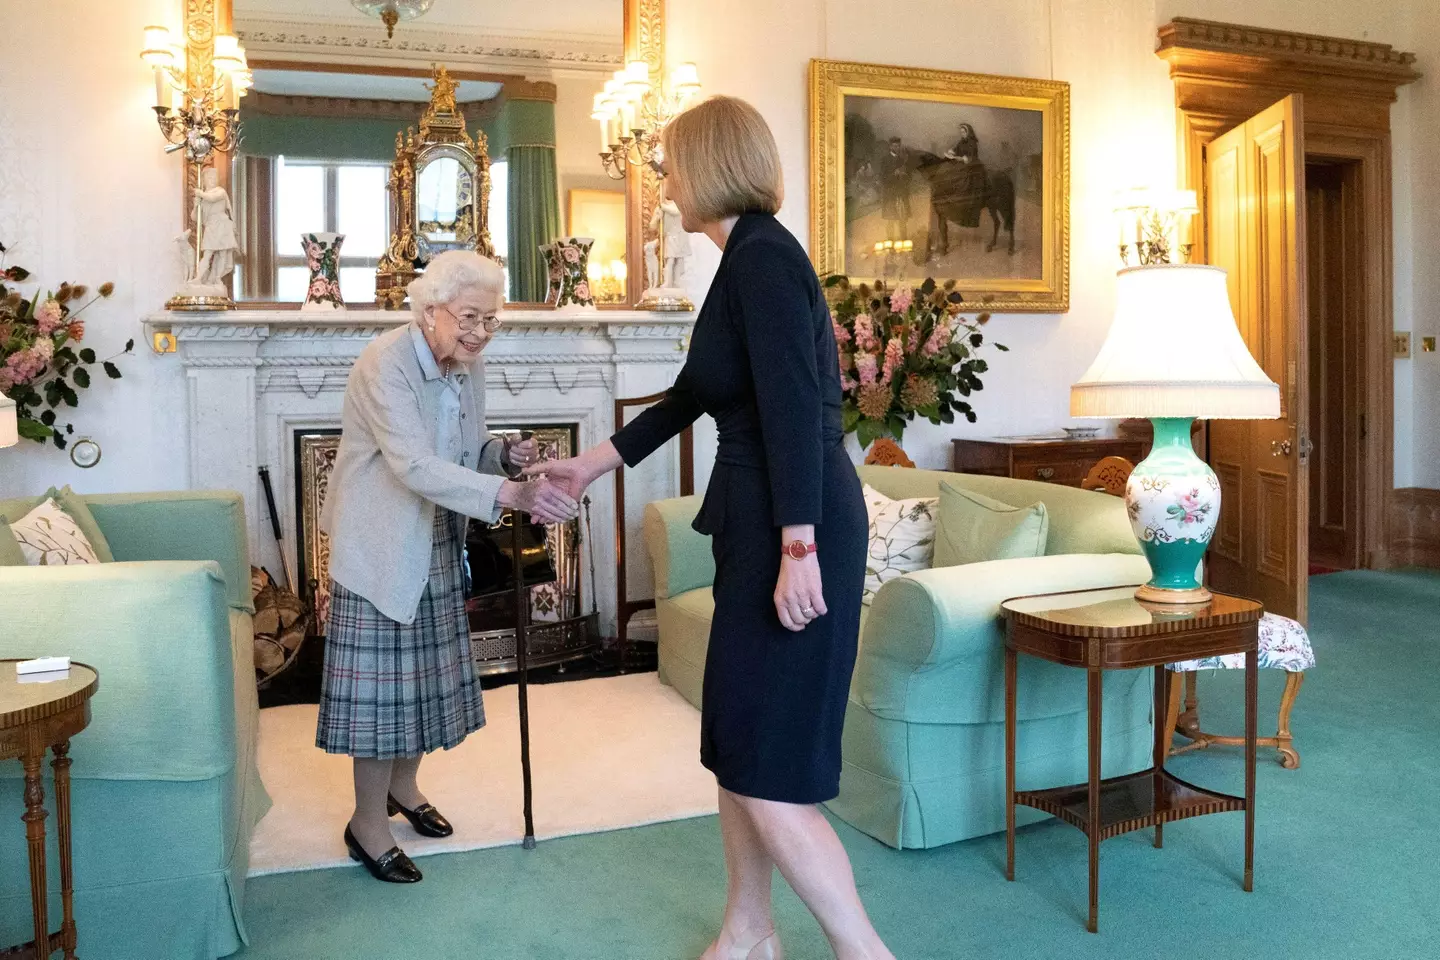 The Queen welcomed prime minister Liz Truss at Balmoral two days before her death.